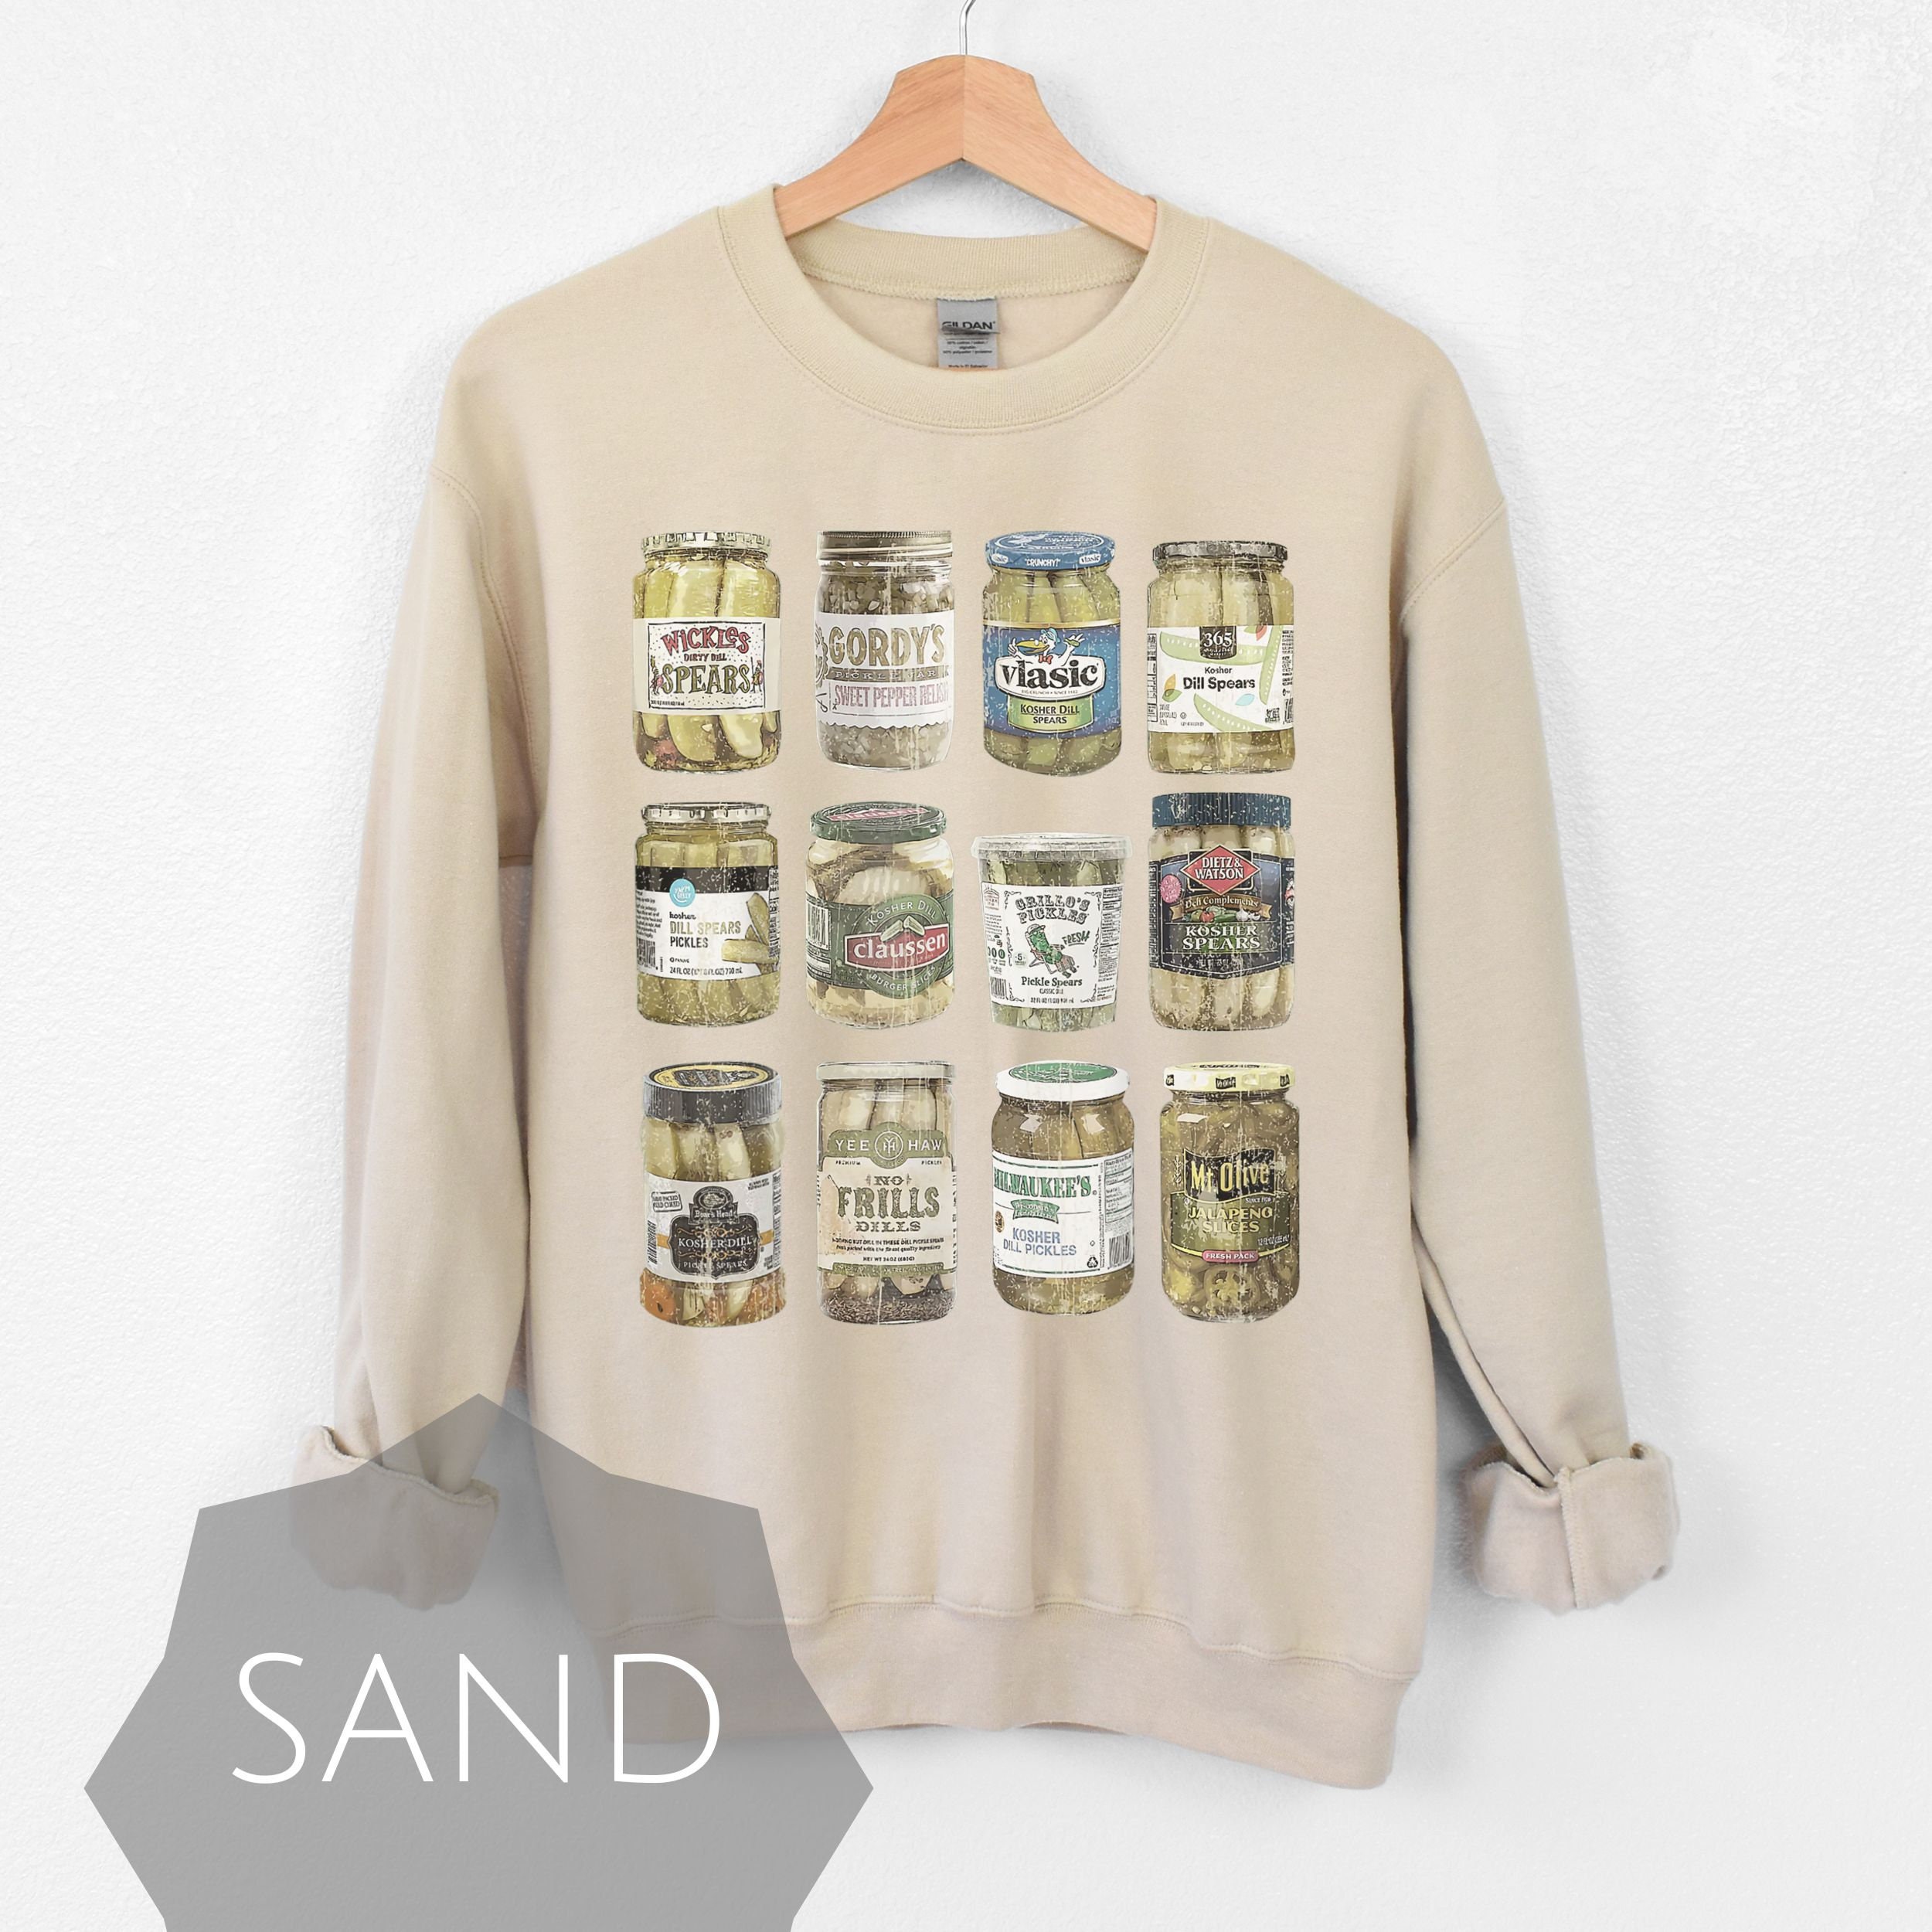 Discover Vintage Canned Pickles Sweatshirt, Pickle Lovers Sweatshirt, Cool Pickle Sweatshirt